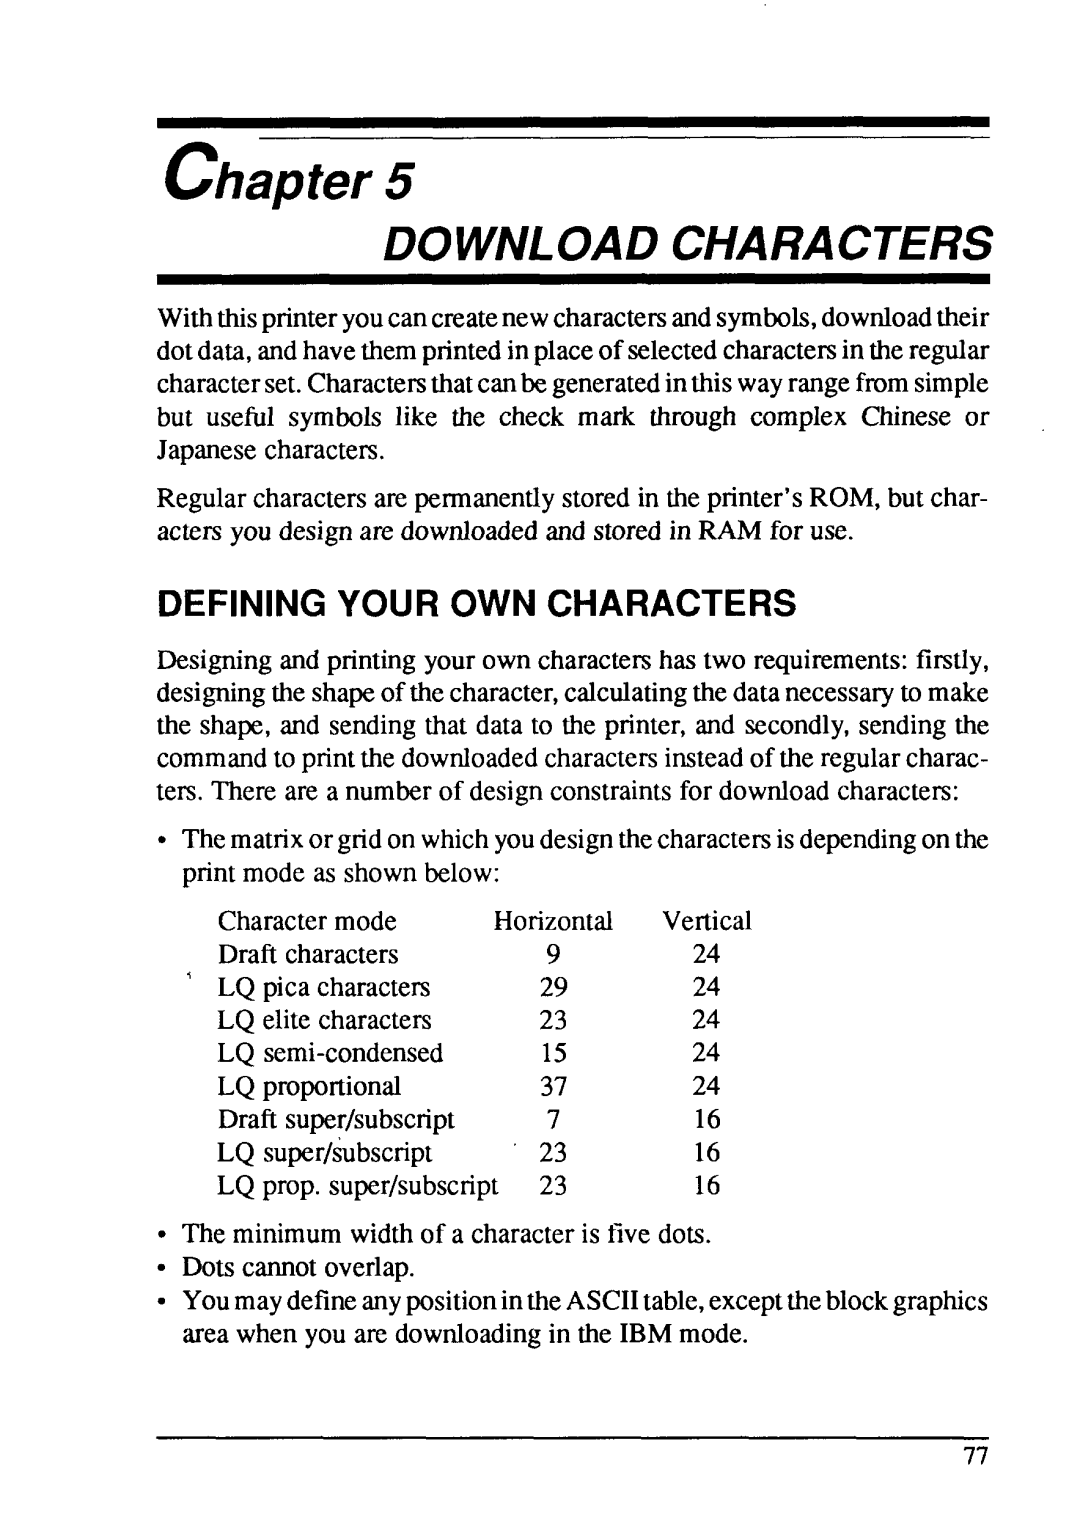 Star Micronics LC24-15 user manual Chapter, Download Characters, Defining Your Own Characters 